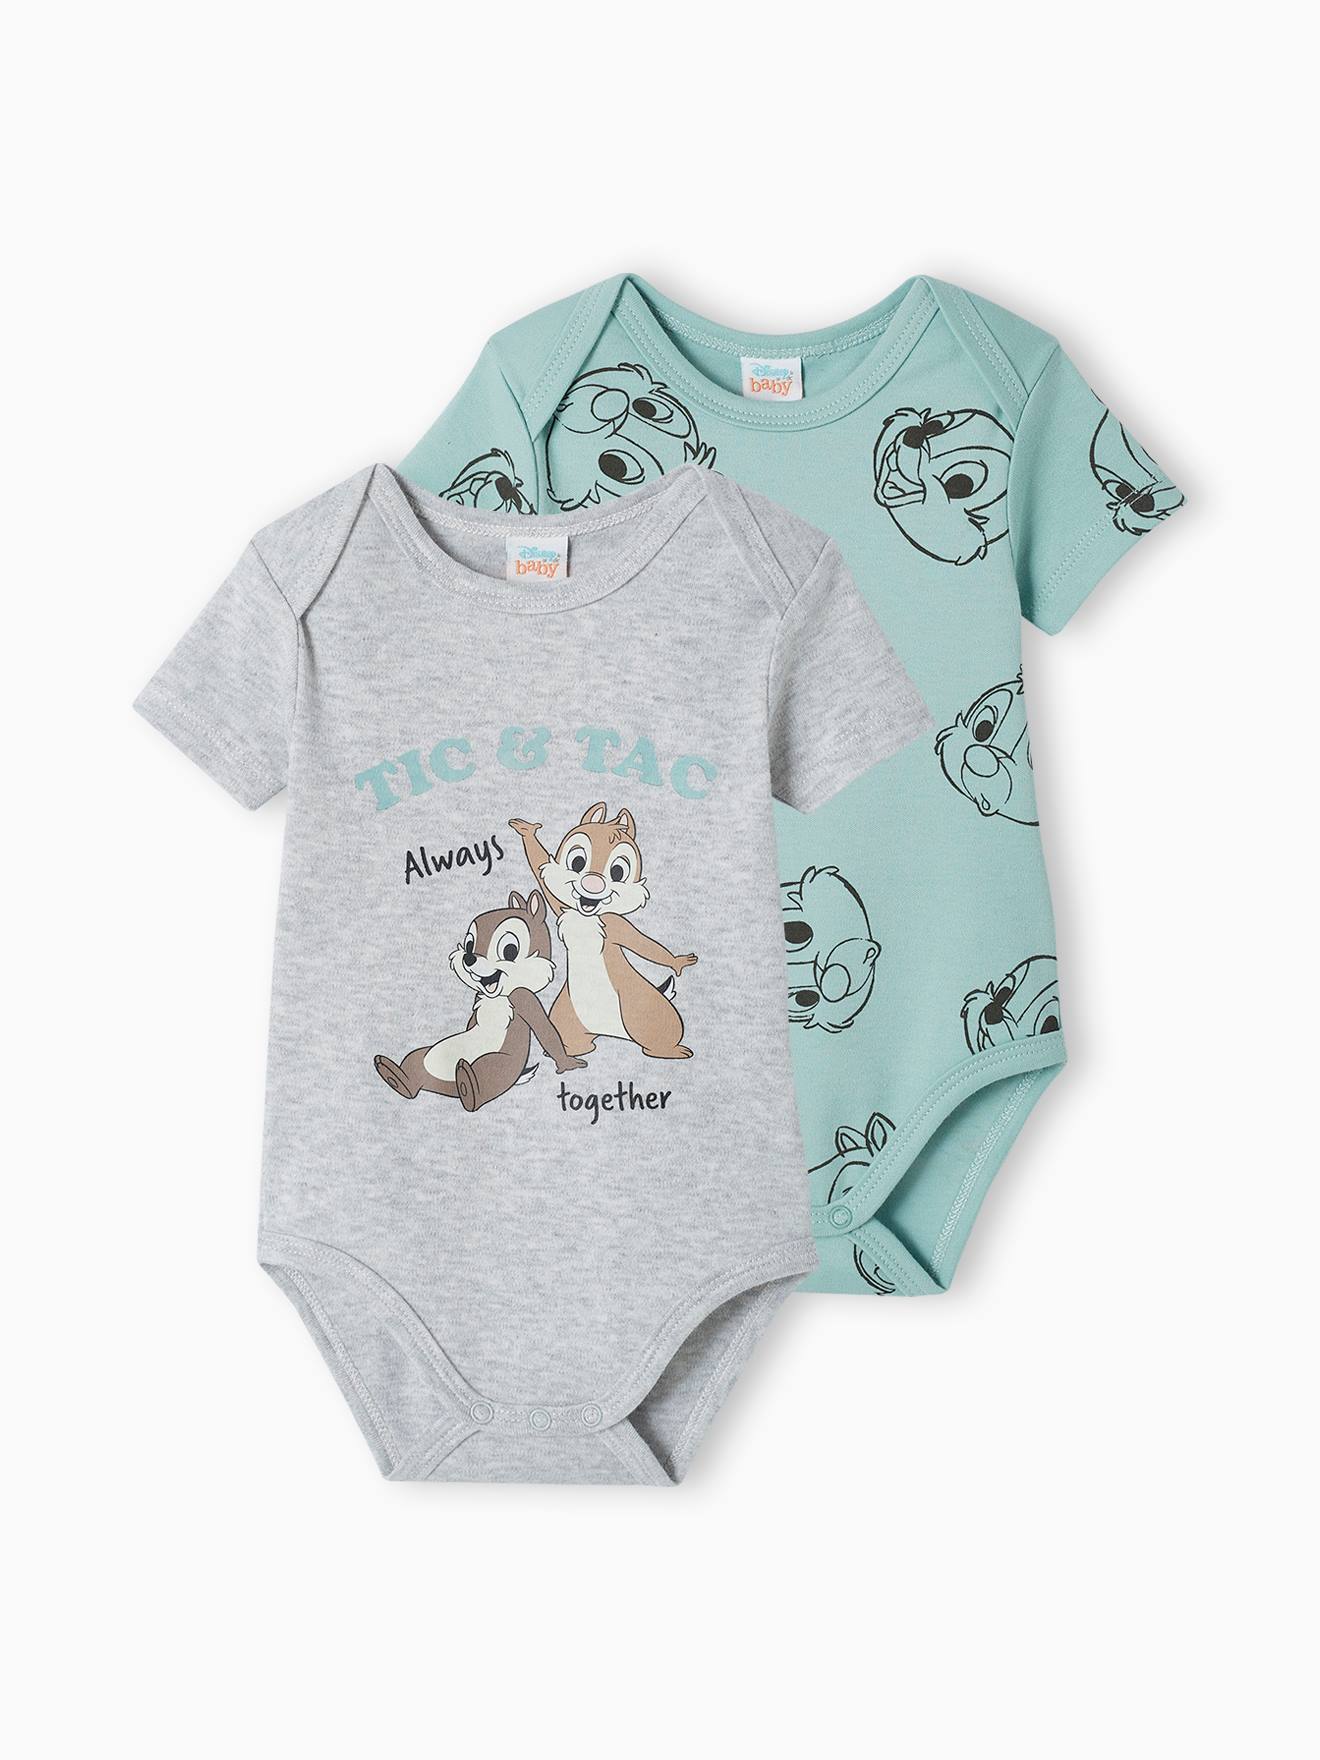 Pack of 2 Chip ’n’ Dale Bodysuits for Baby Boys by Disney(r) sage green